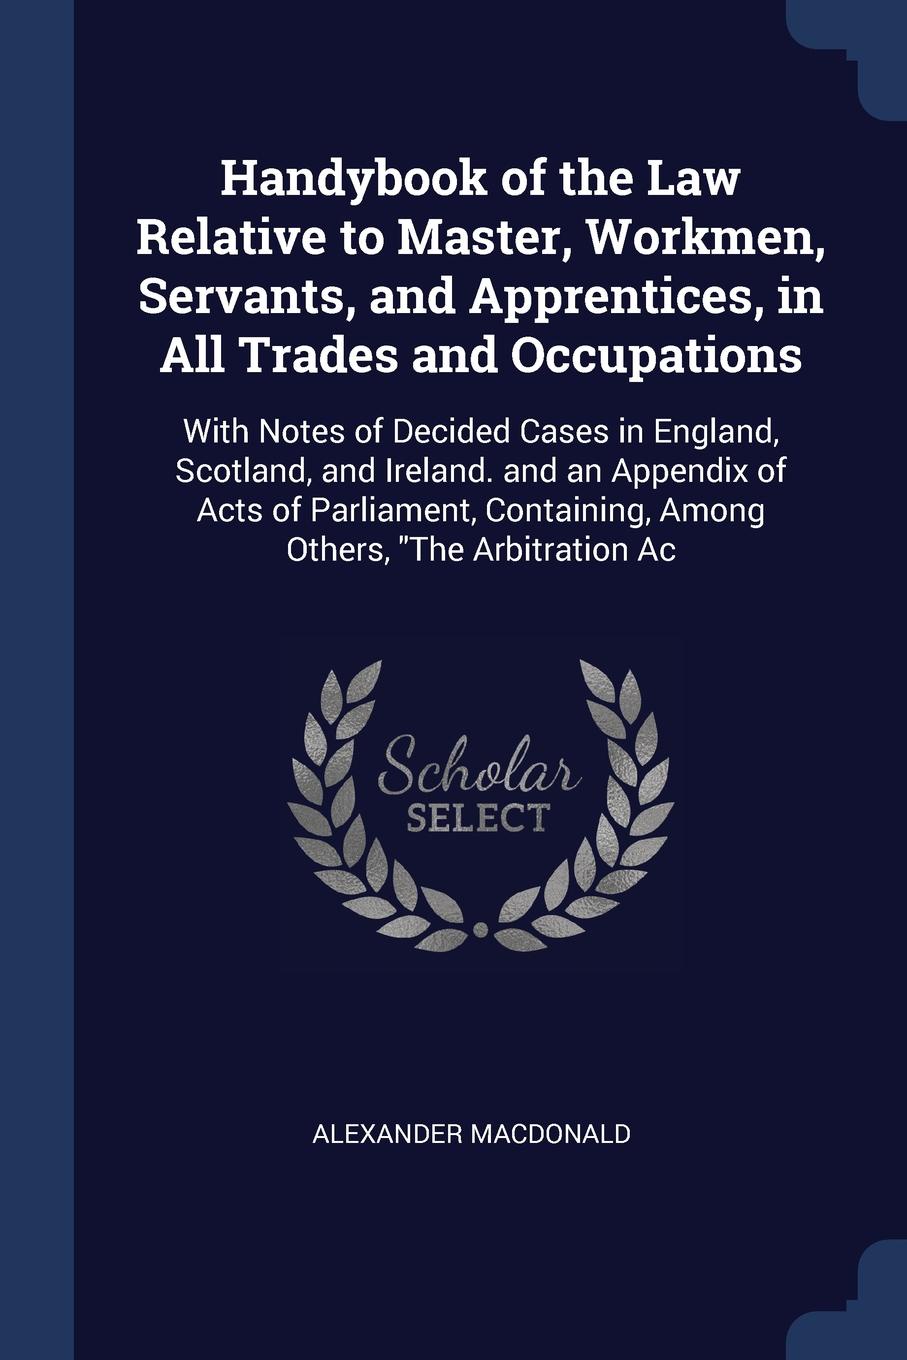 Handybook of the Law Relative to Master, Workmen, Servants, and Apprentices, in All Trades and Occupations. With Notes of Decided Cases in England, Scotland, and Ireland. and an Appendix of Acts of Parliament, Containing, Among Others, \